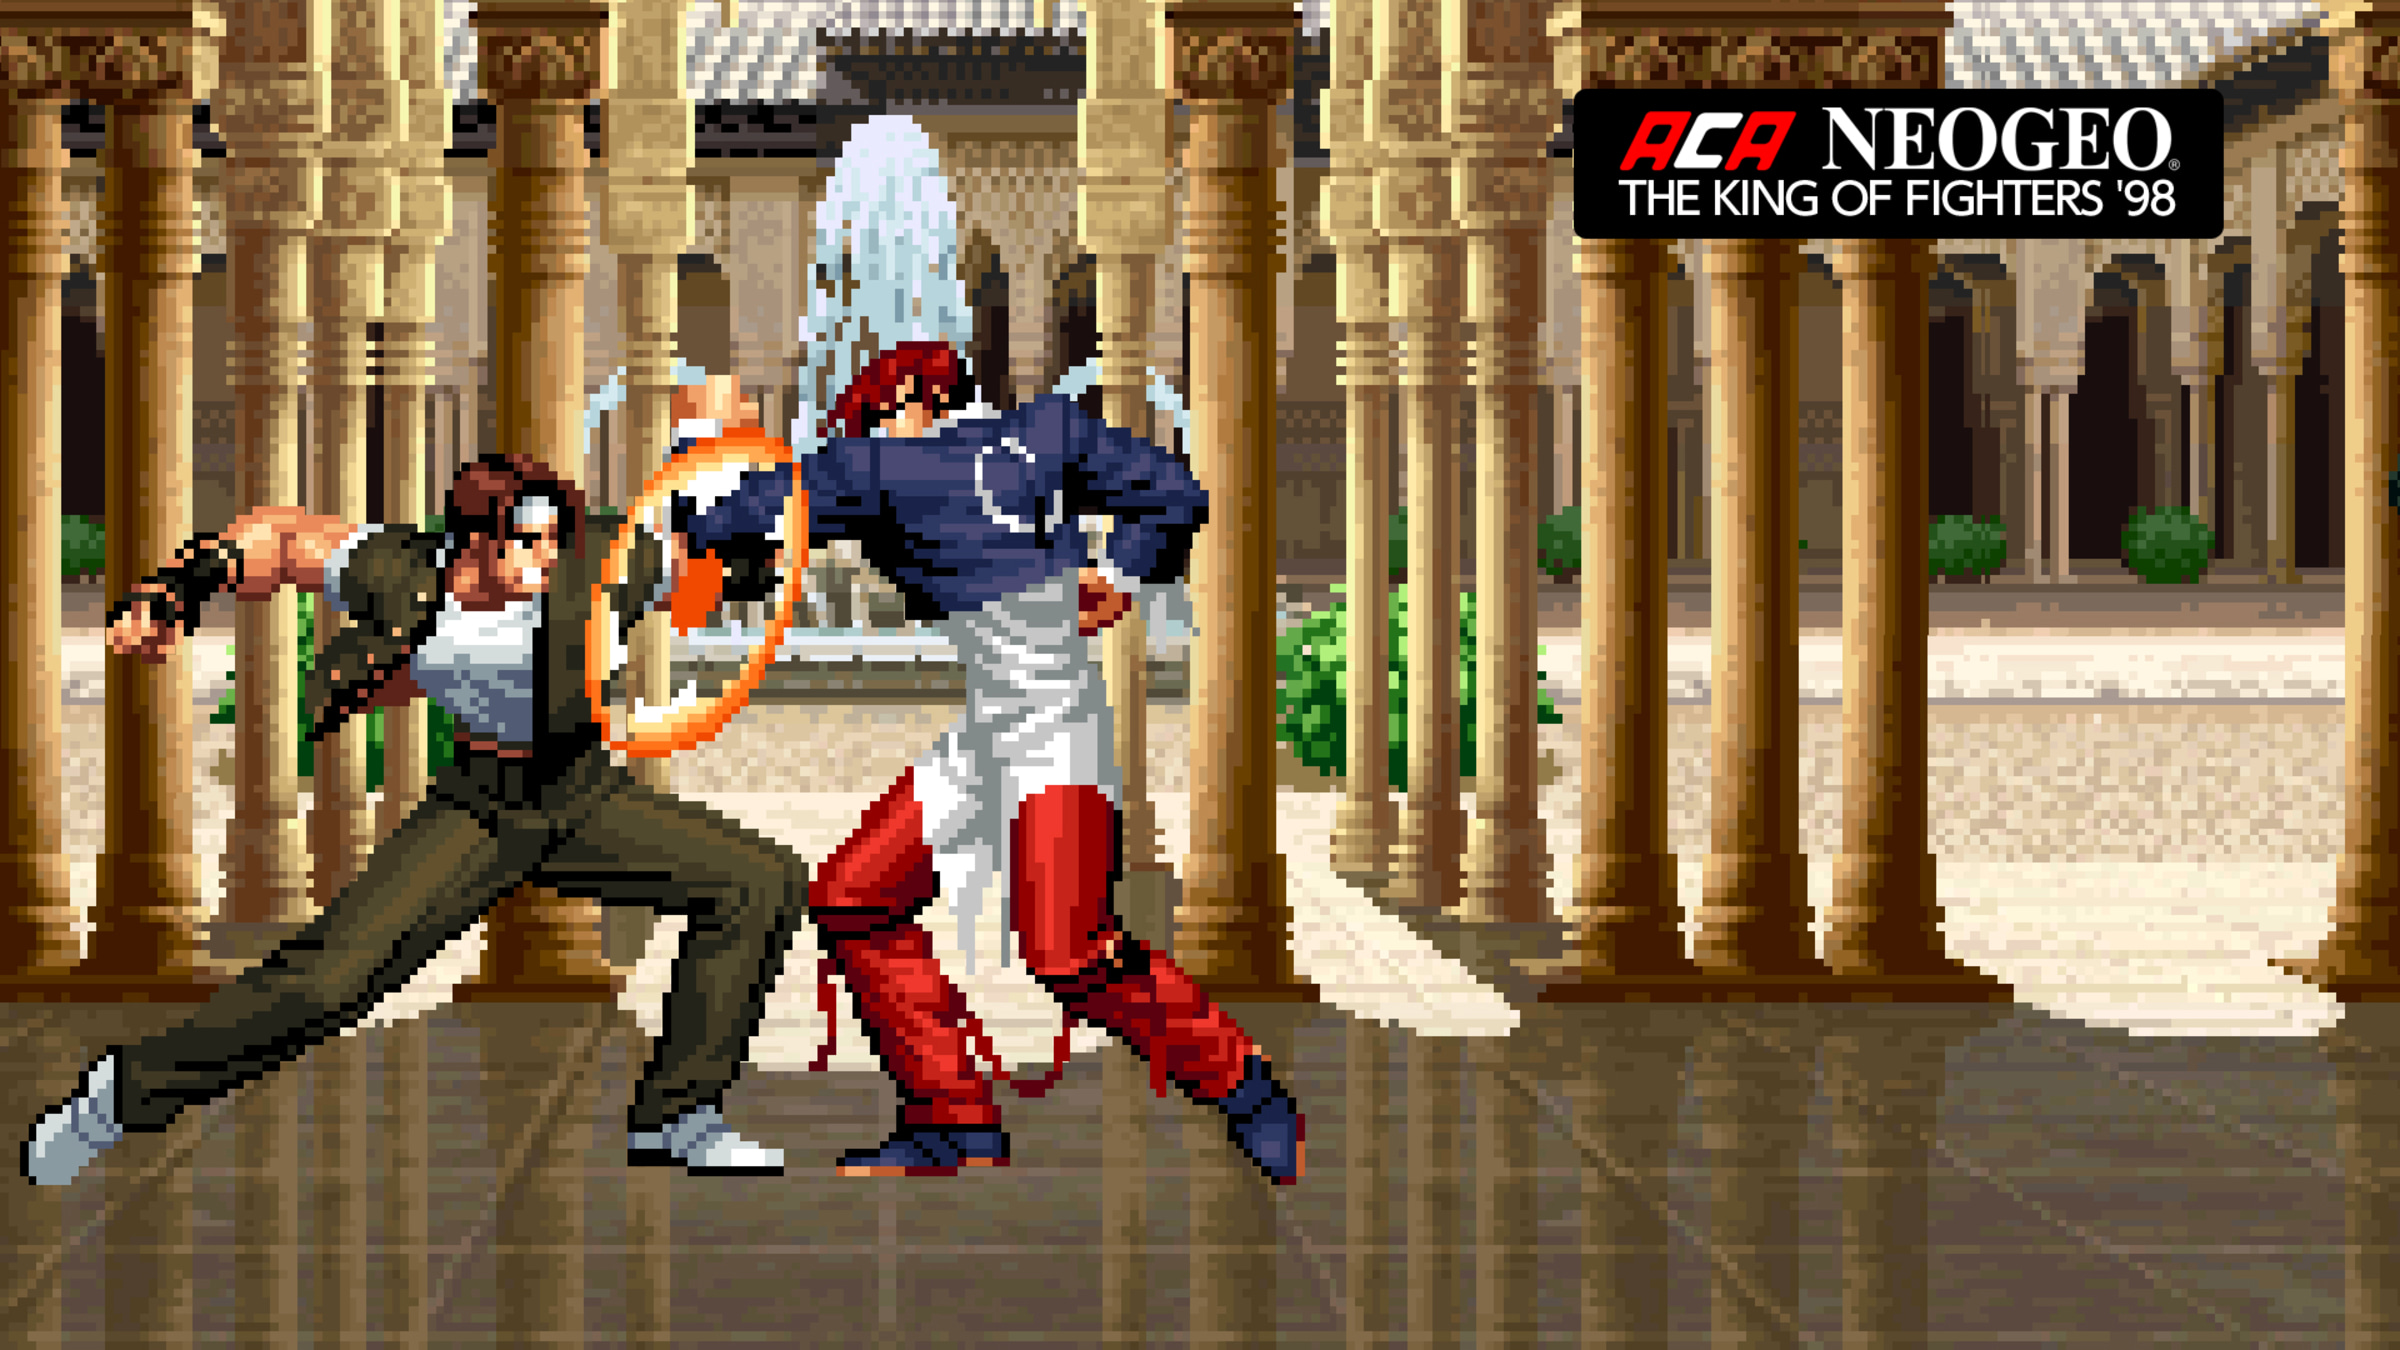 Aca Neogeo The King Of Fighters '98 For Nintendo Switch - Nintendo Official  Site